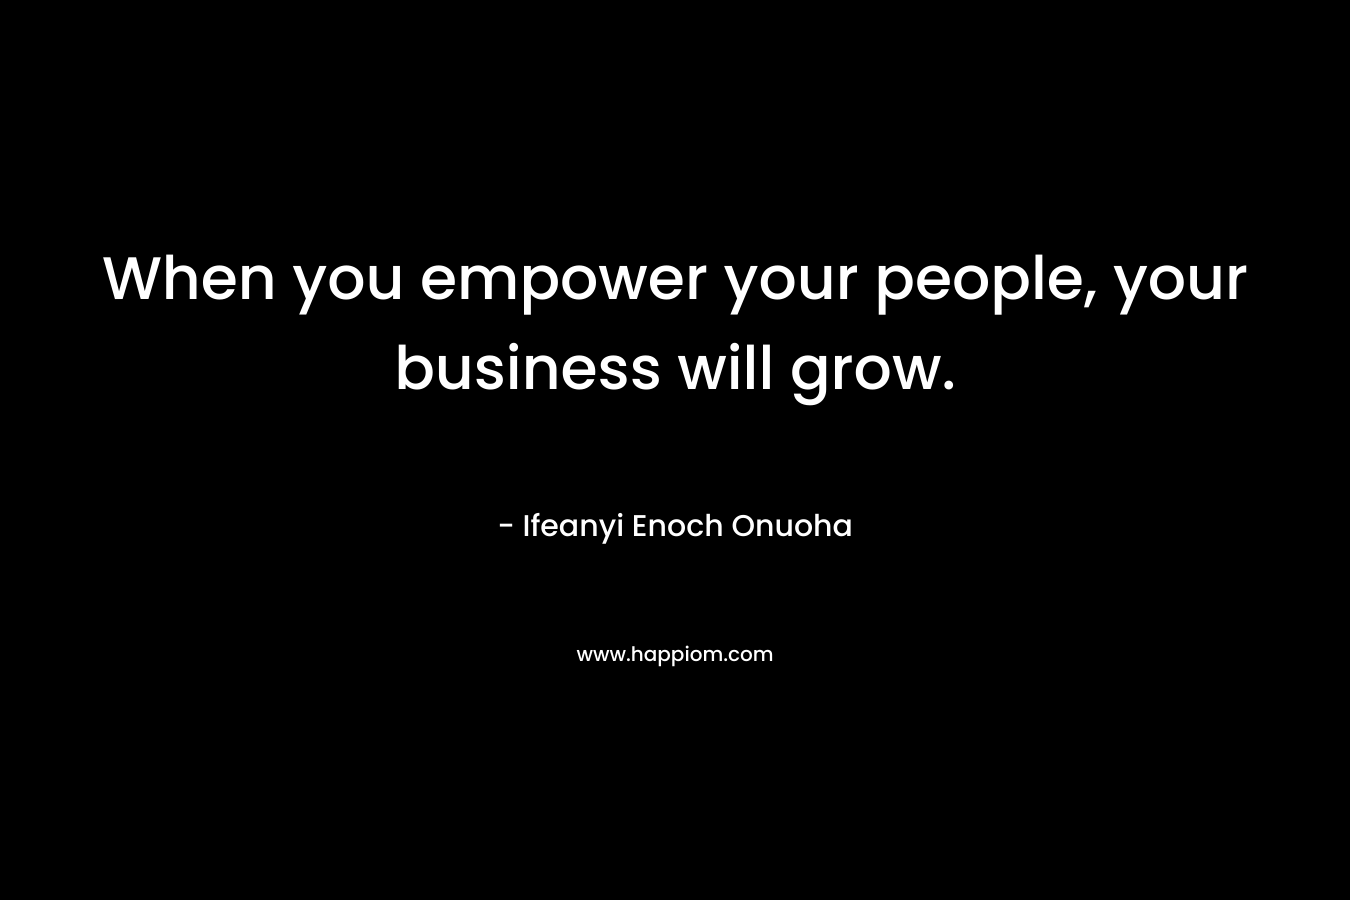 When you empower your people, your business will grow.